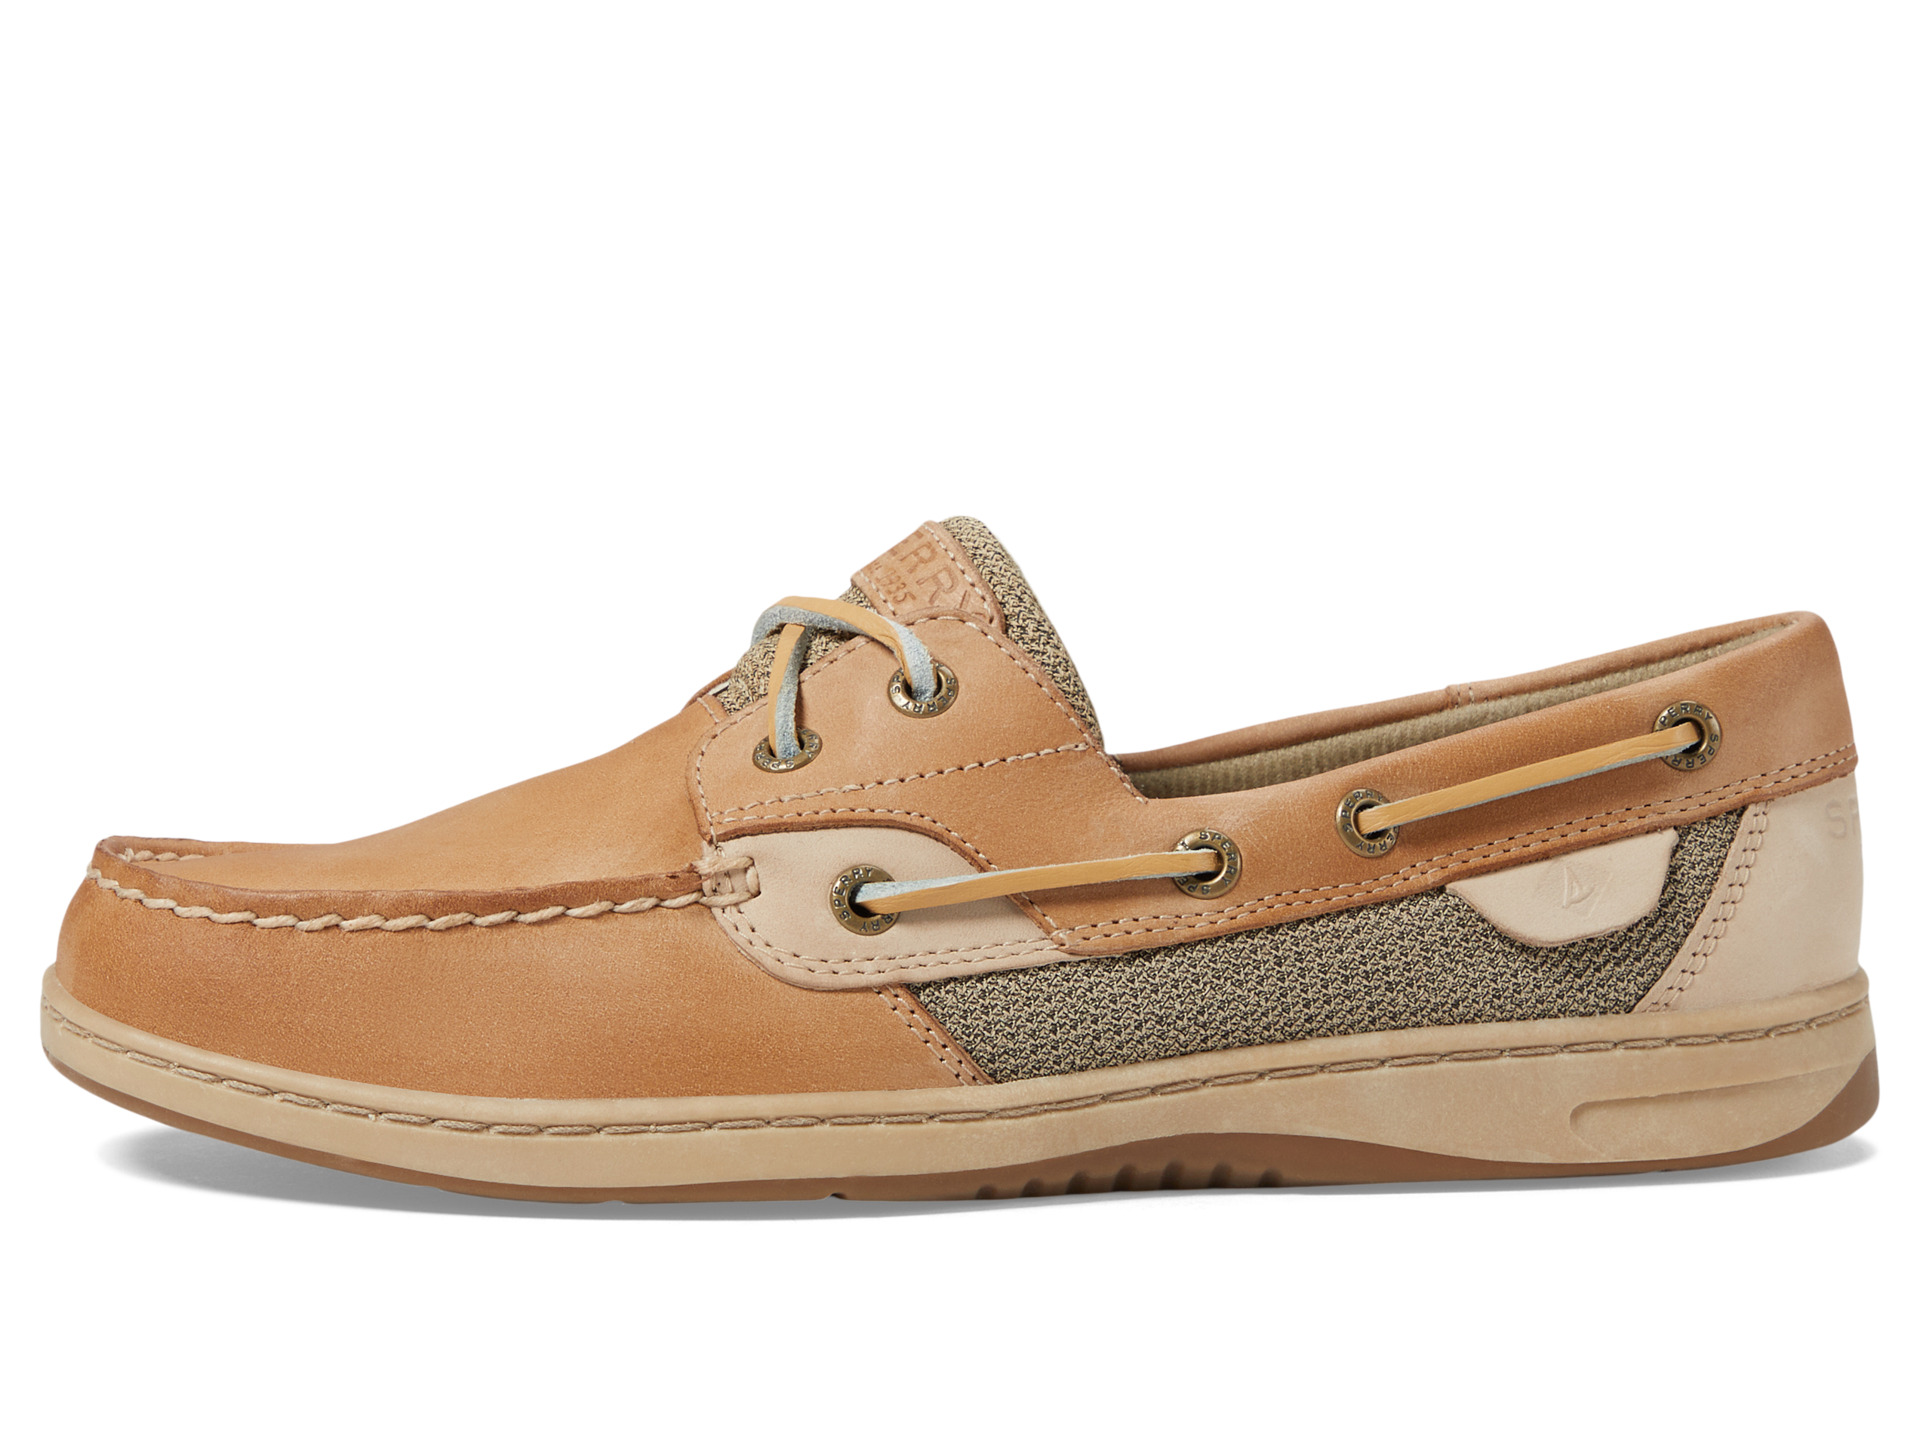 Sperry Top-Sider Bluefish 2-Eye - Zappos.com Free Shipping BOTH Ways